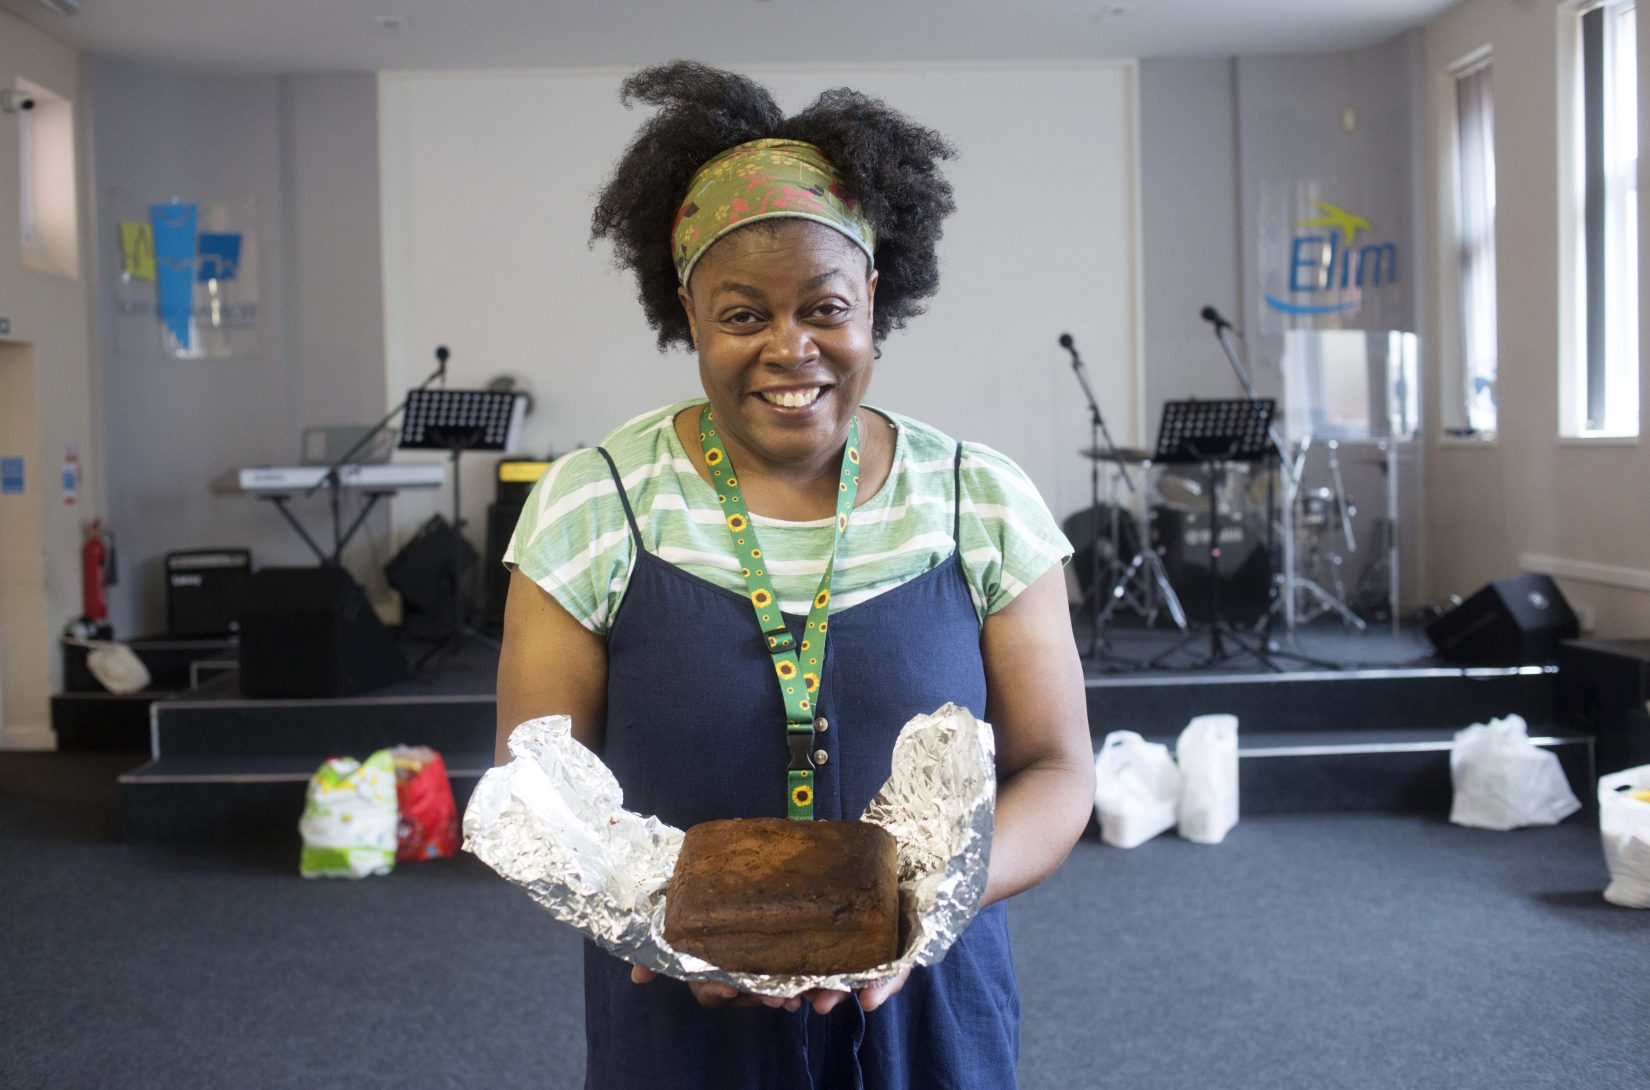 Photograph of a woman with black hair and a green headband, smiling while holding a cake in the foodbank she works at. She’s wearing a stripey green top with a blue dress and has a lanyard on with sunflower fabric.